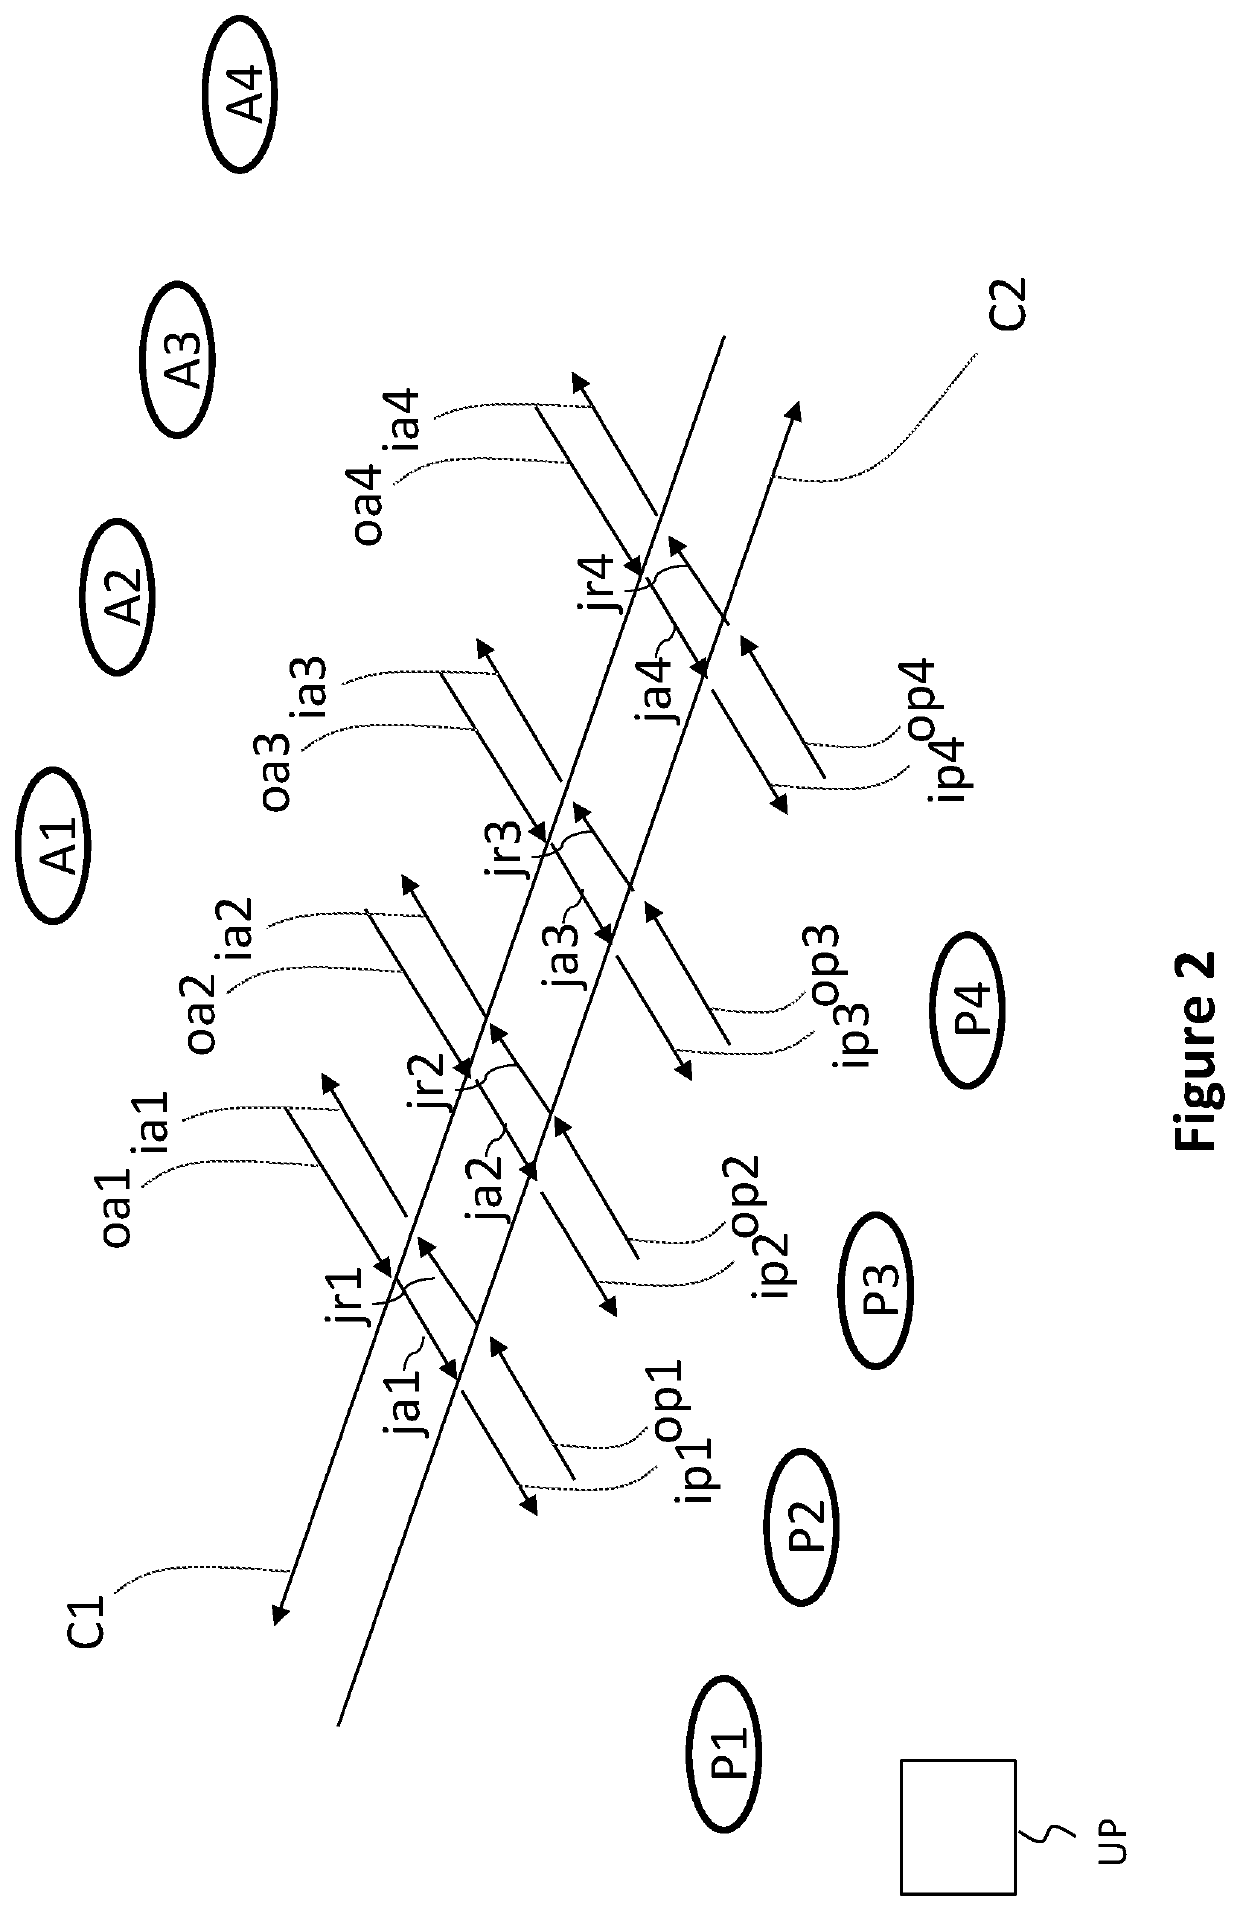 System for conveying loads between a plurality of storage units and a plurality of preparation stations, through a horizontal load-routing network